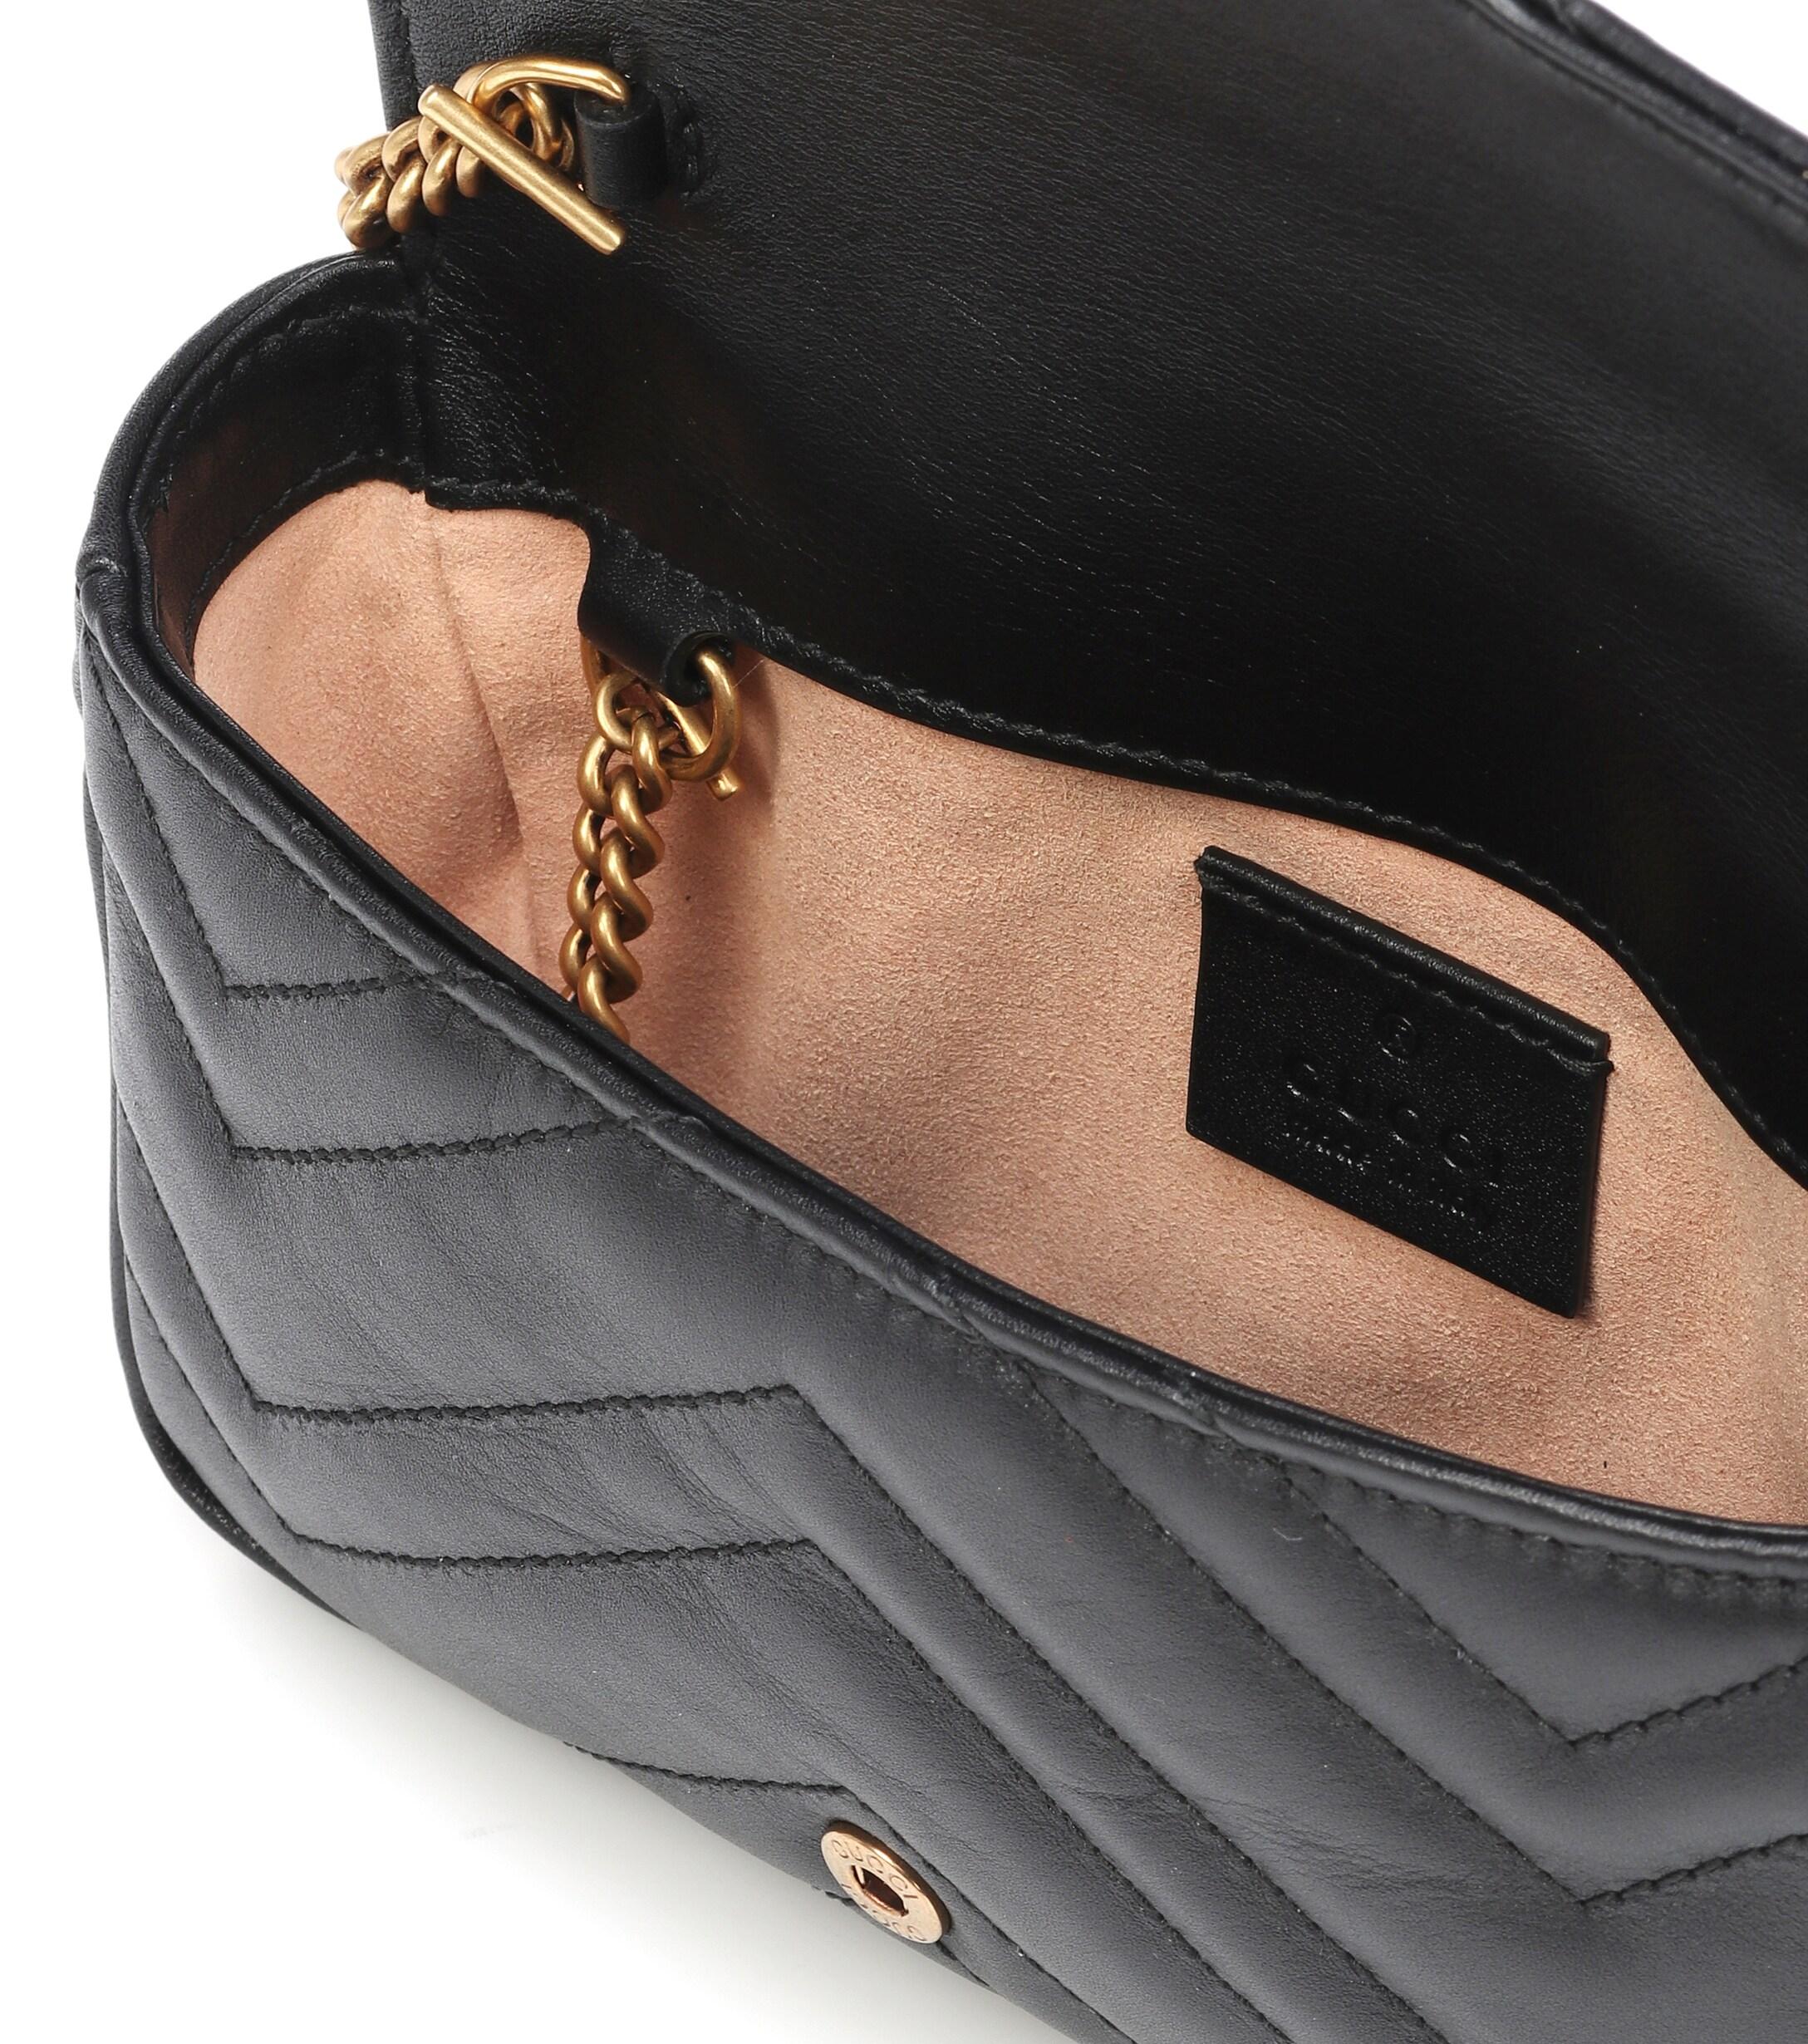 Gucci Leather GG Marmont Mini Shoulder Bag in Black - Lyst